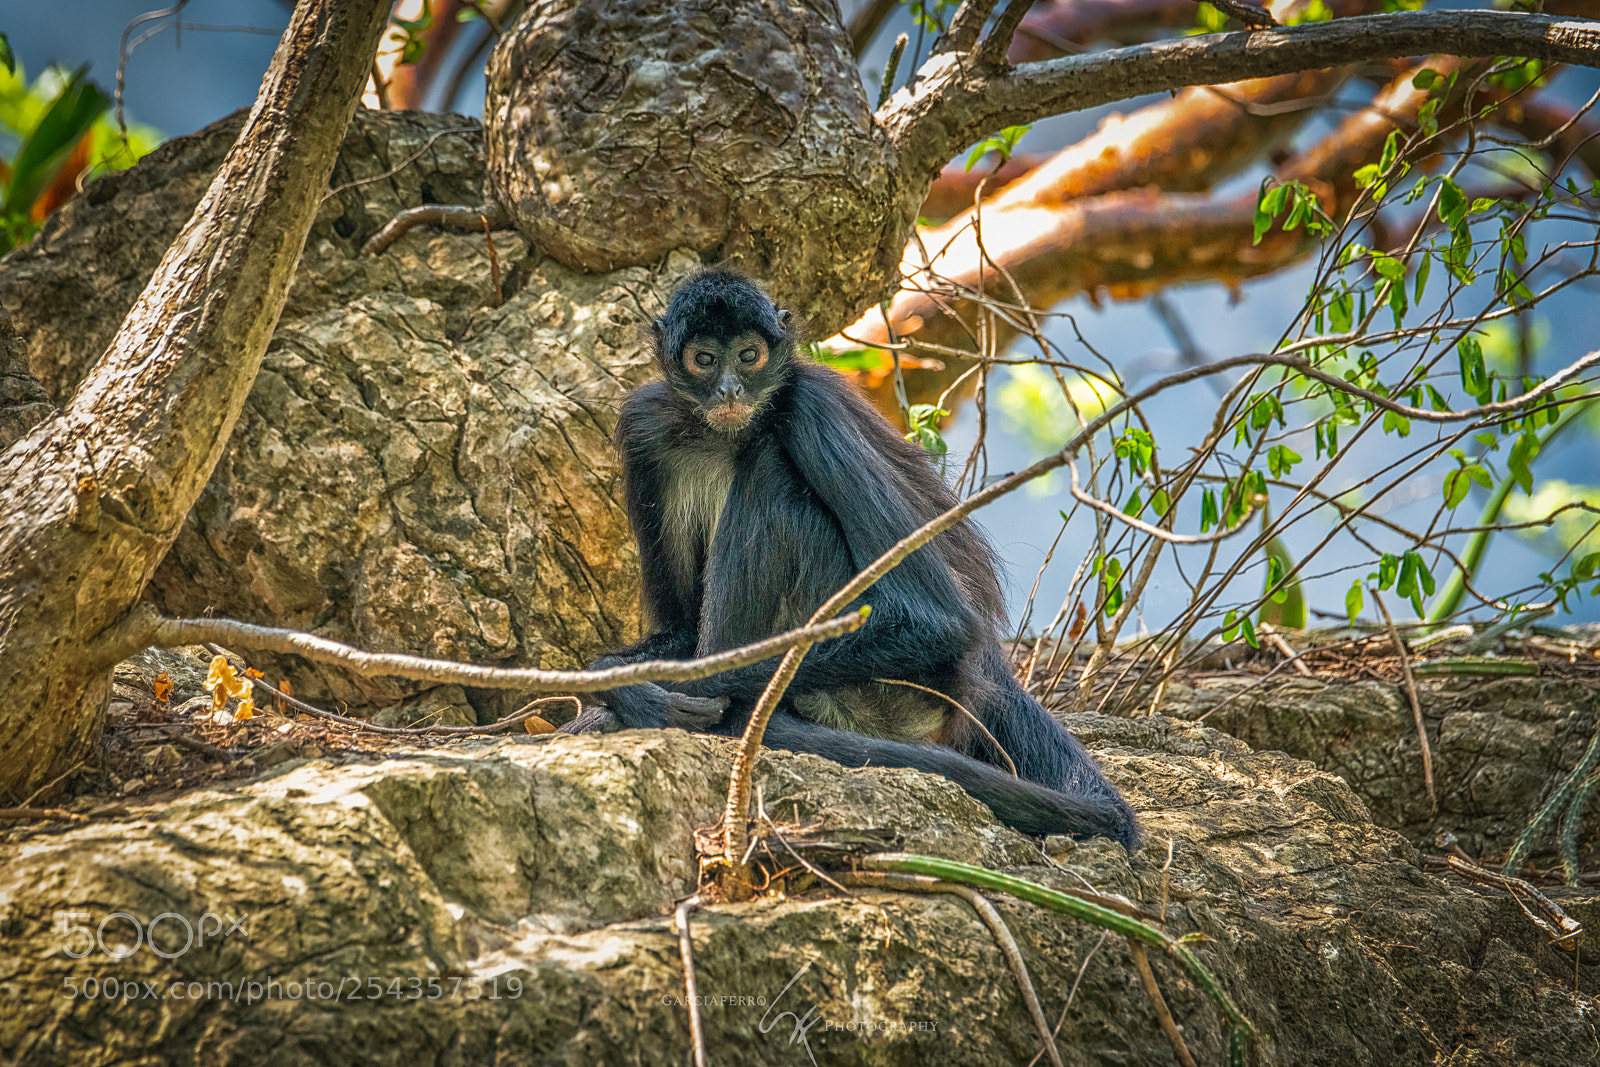 Sony a99 II sample photo. Spider monkey photography